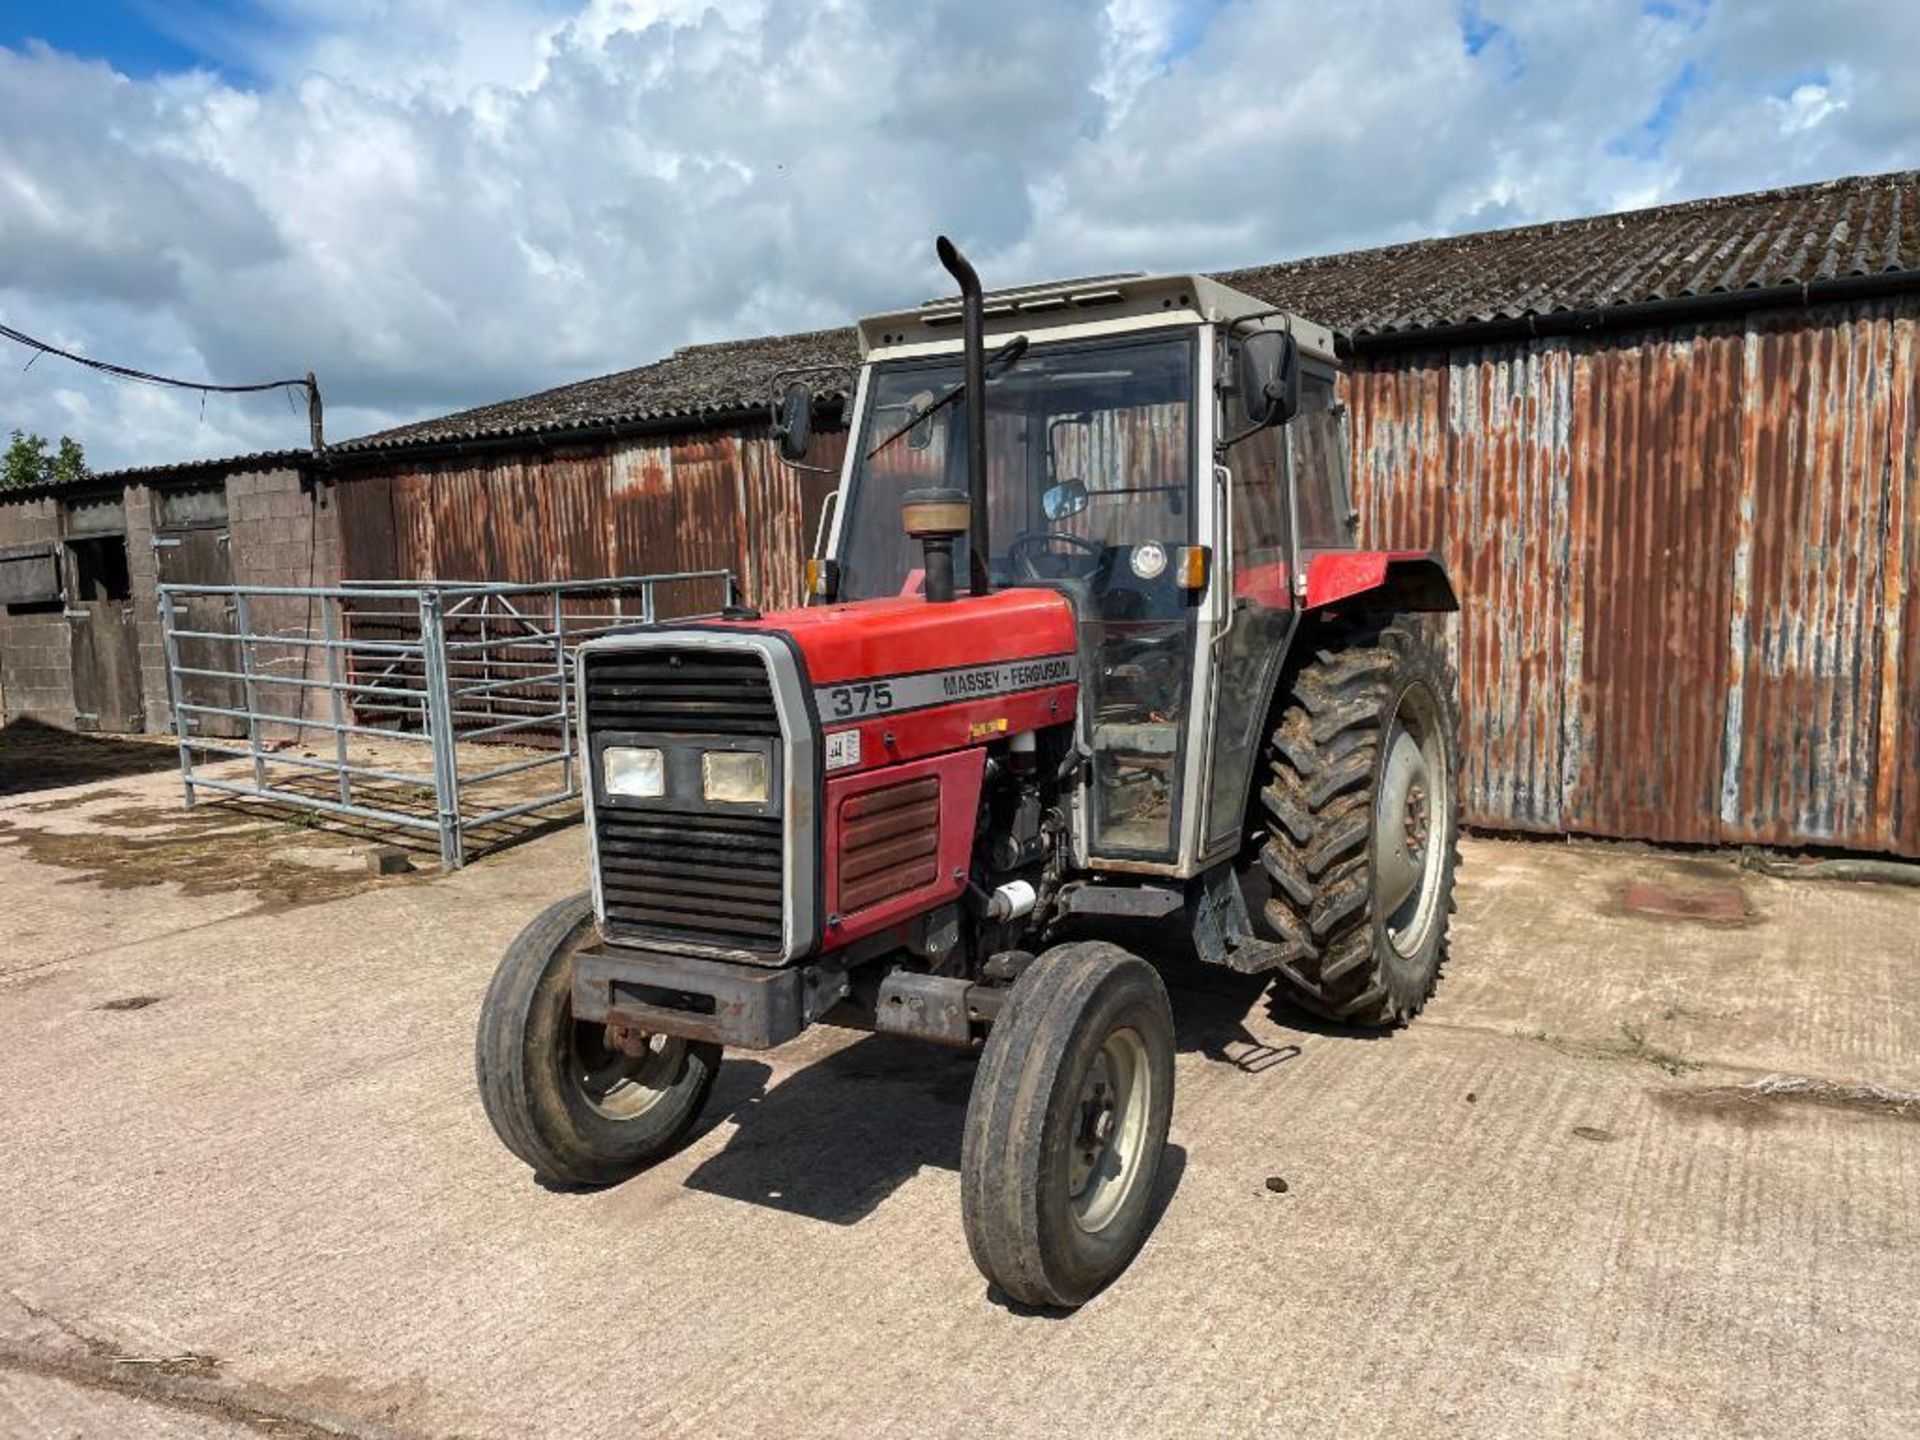 1990 Massey Ferguson 375 2wd tractor, 2 manual spools on Firestone 7.5-16 front and Firestone 13.6-3 - Image 20 of 24